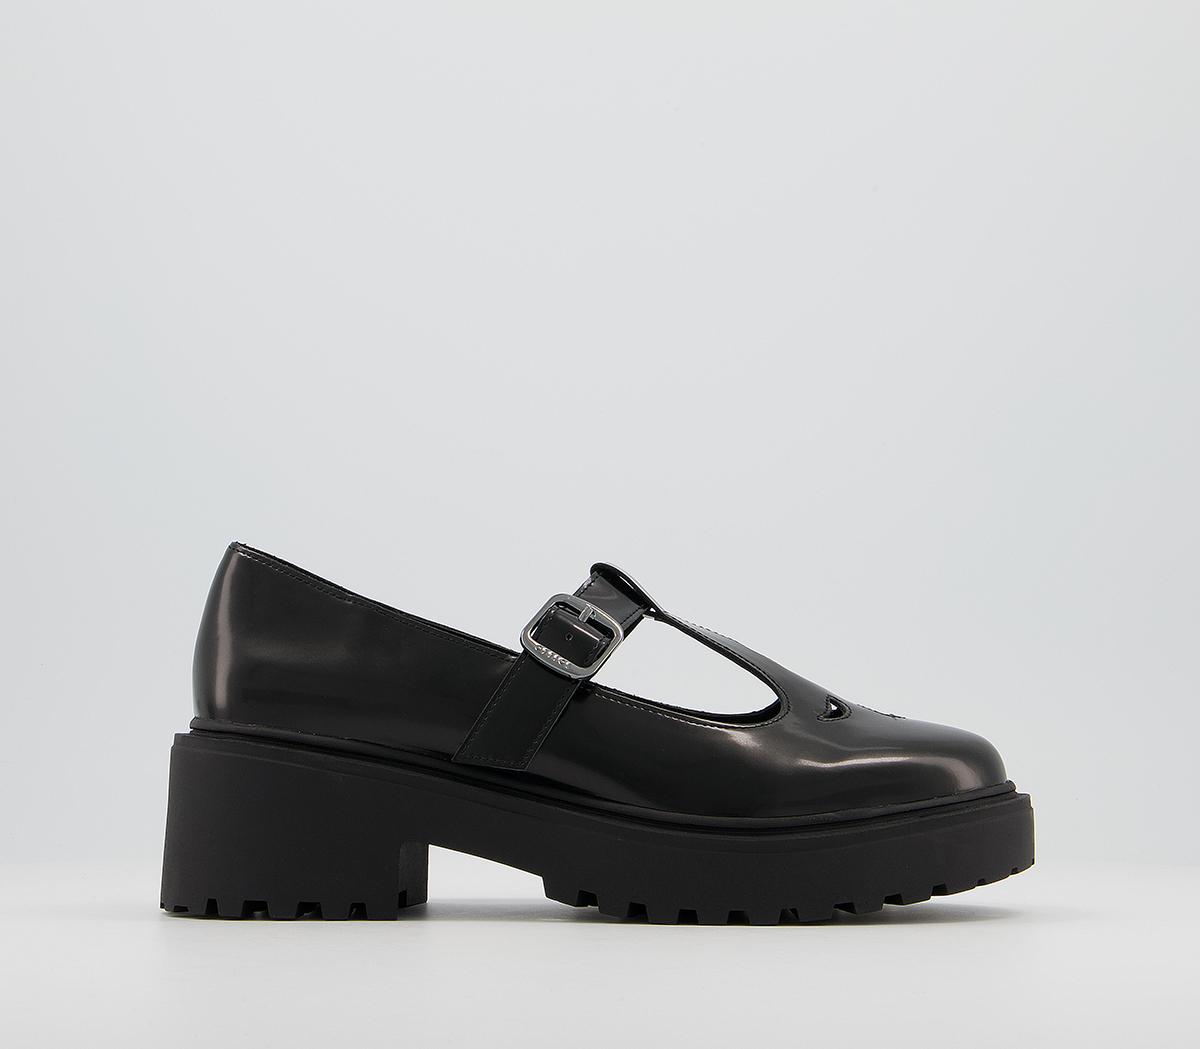 OfficeFrankly T-Bar Chunky ShoesShiny Black